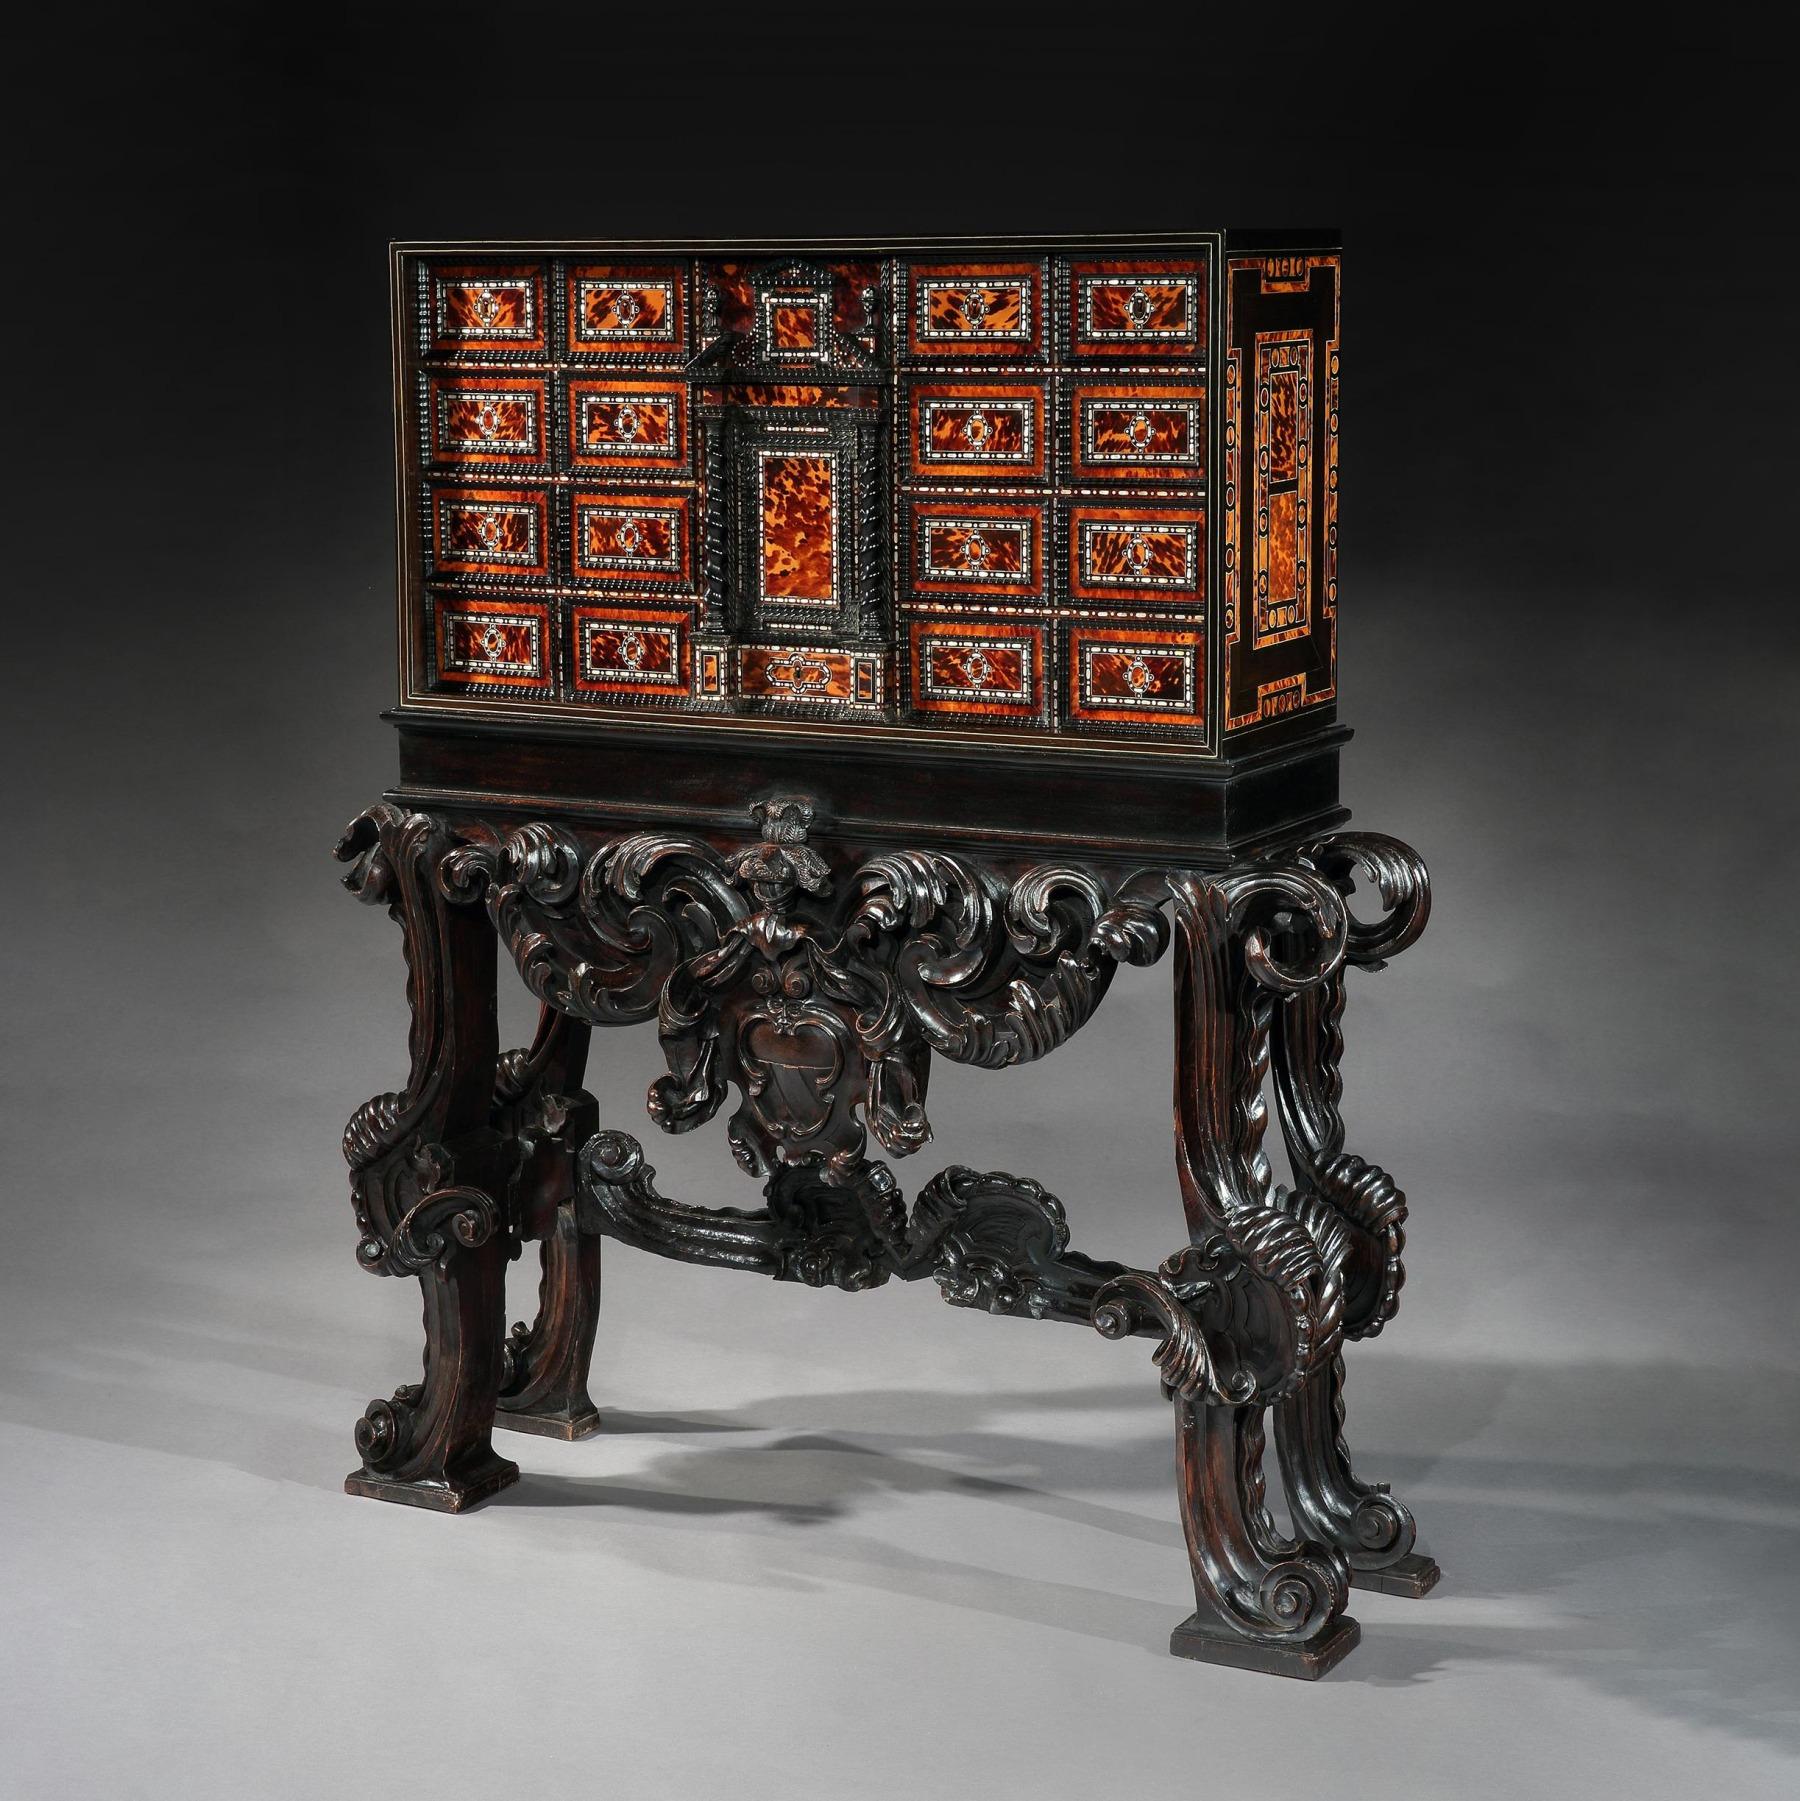 Rare 17th Century Neapolitan Ebony Tortoiseshell and Mother of Pearl Cabinet For Sale 3